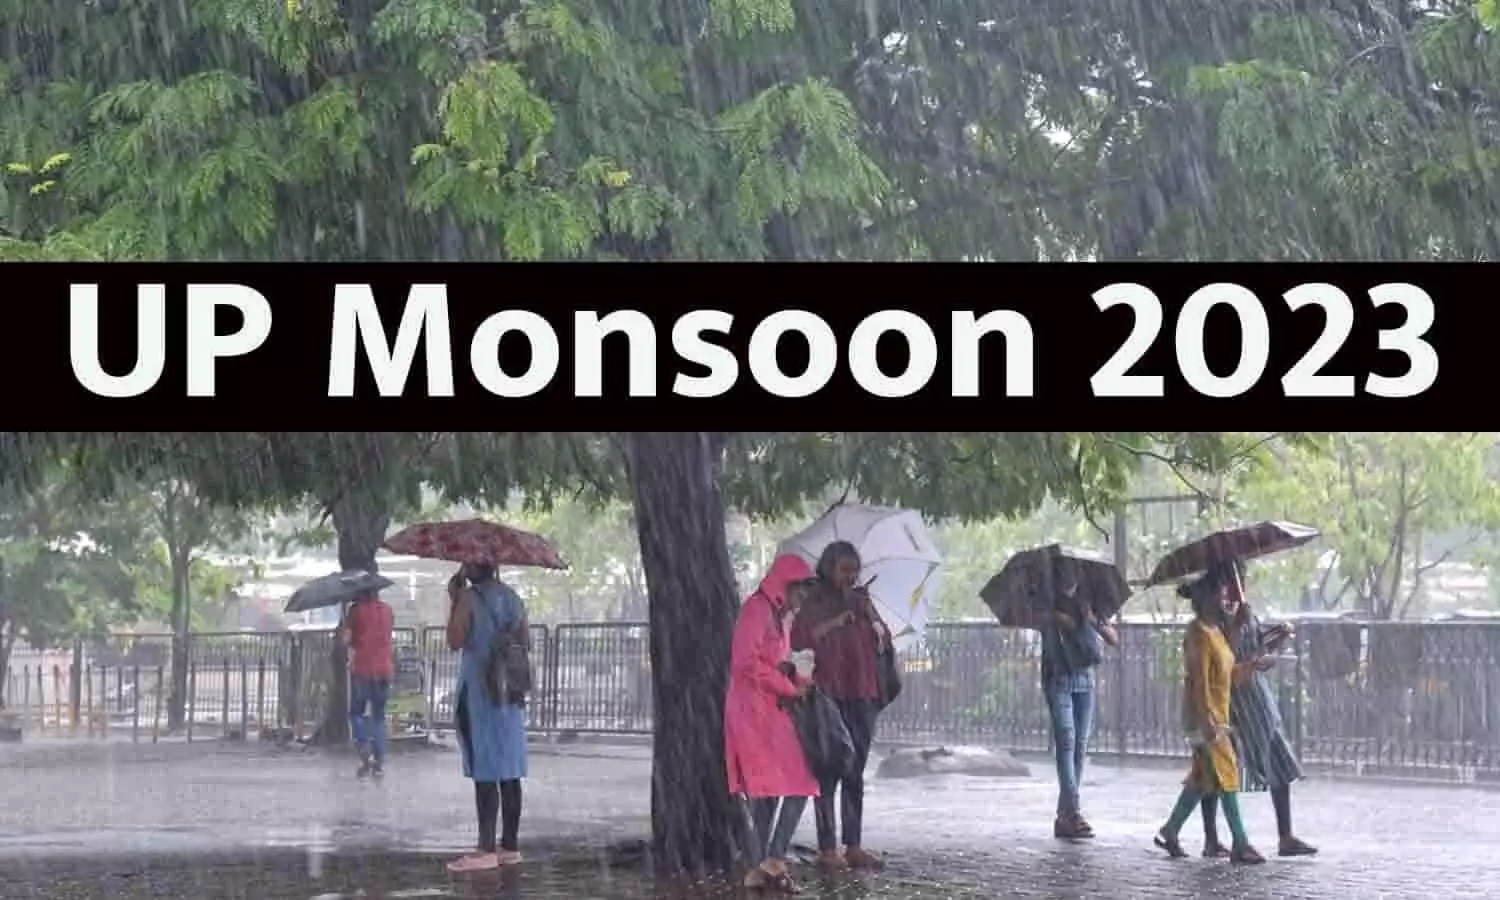 UP Monsoon 2023 Date